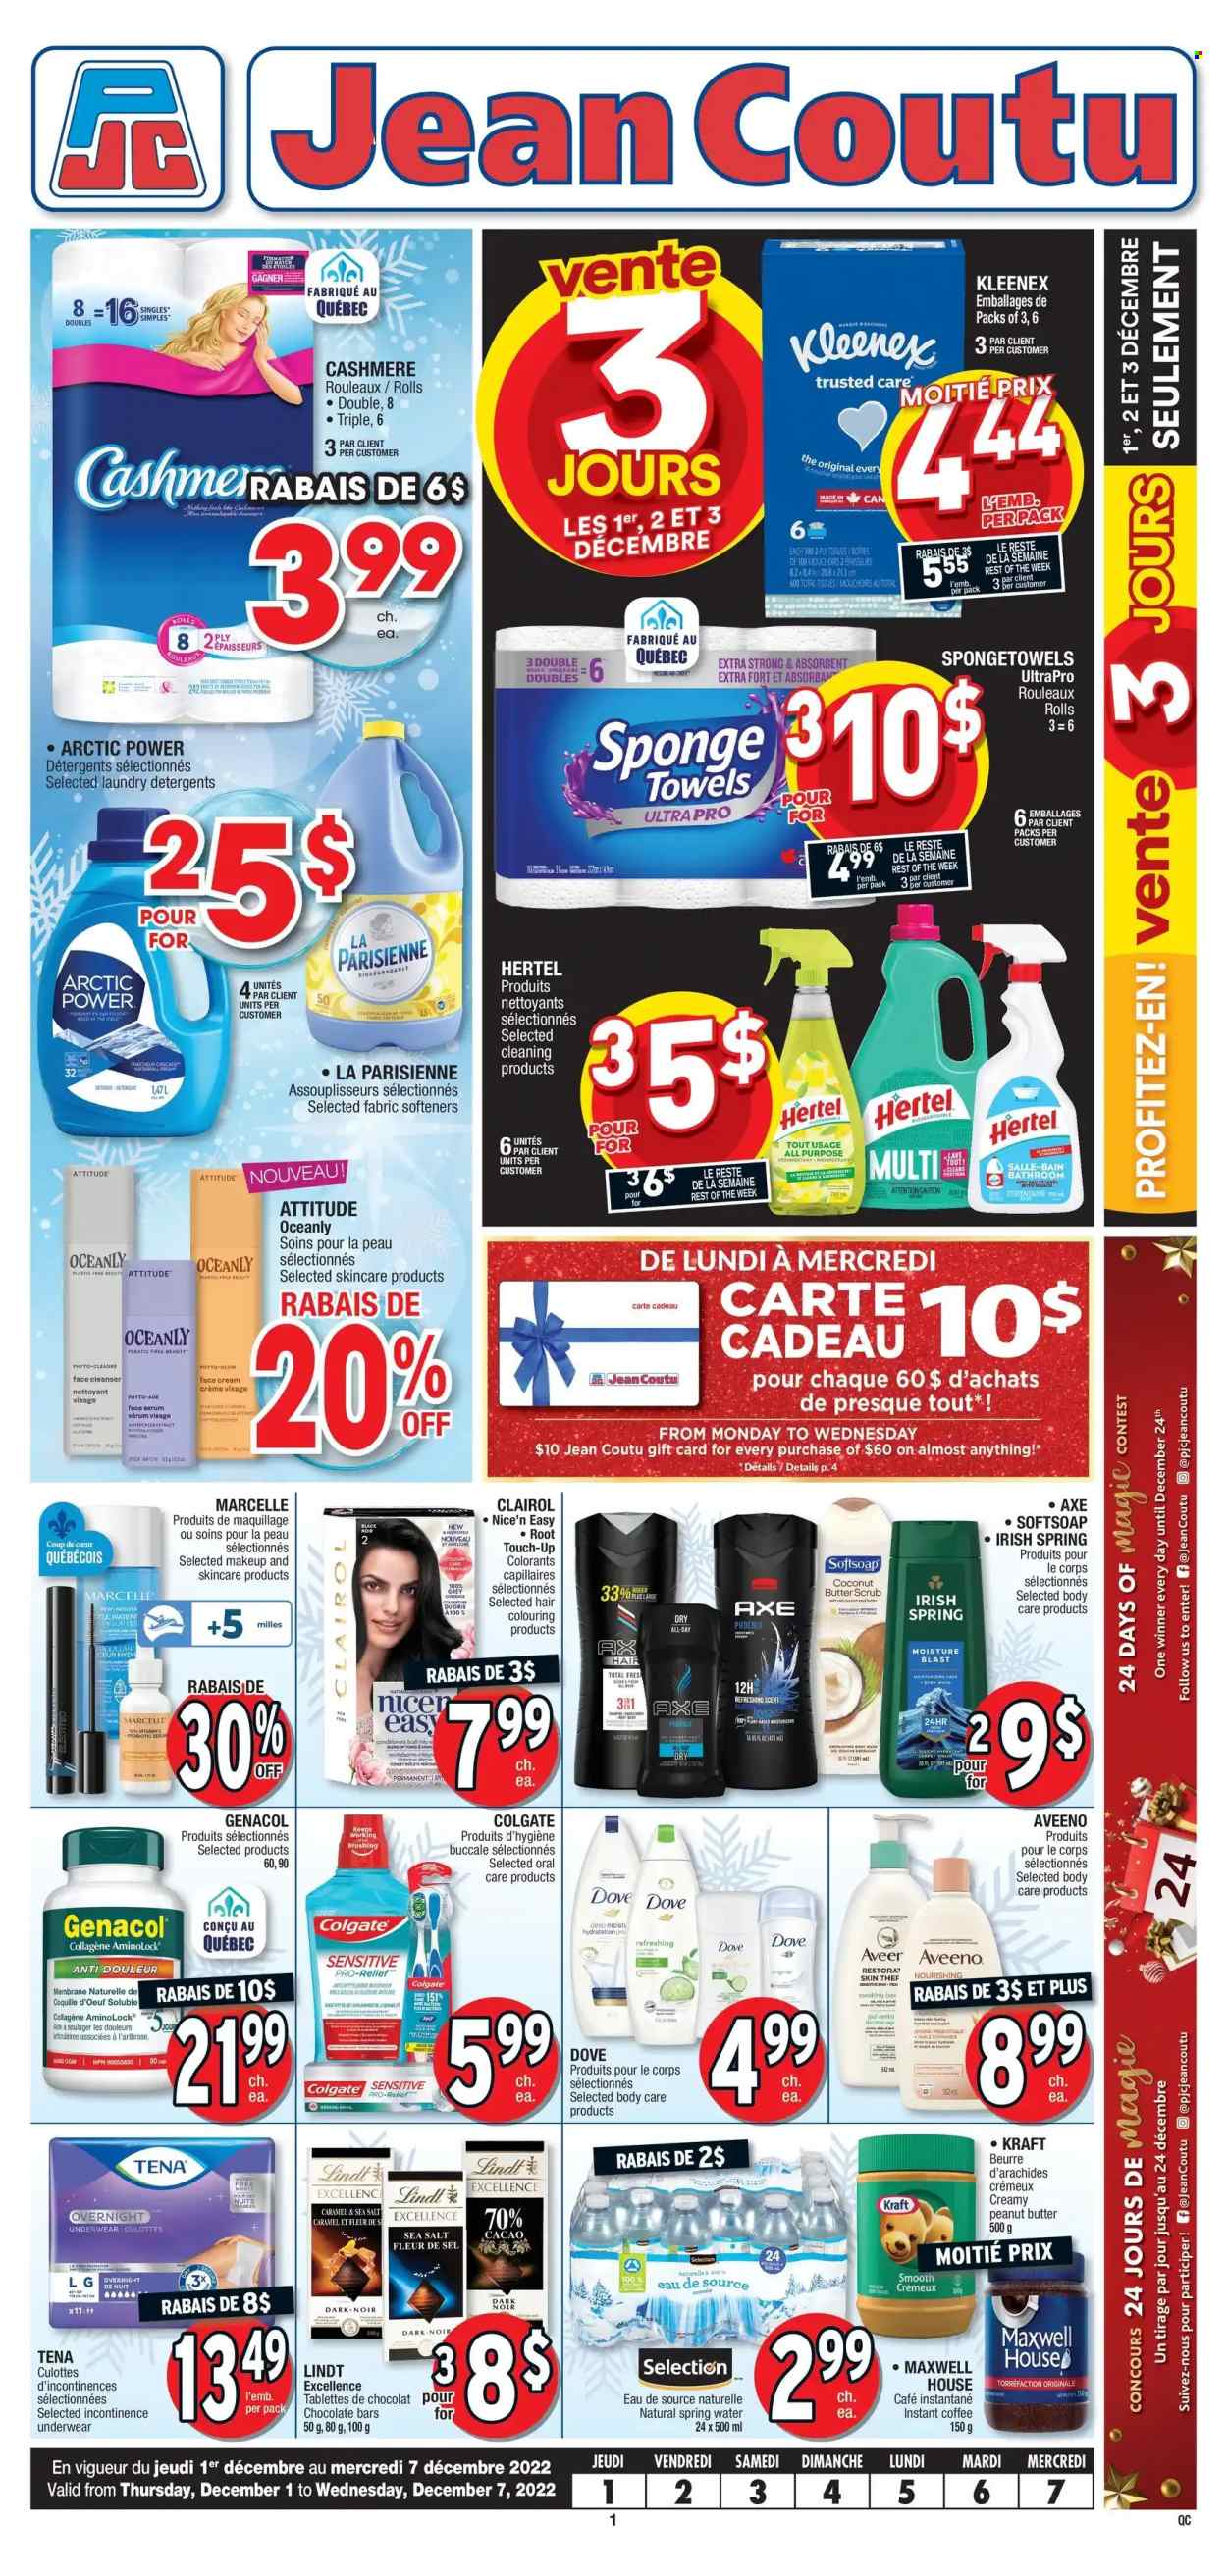 thumbnail - Jean Coutu Flyer - December 01, 2022 - December 07, 2022 - Sales products - Dove, chocolate bar, watercress, Kraft®, peanut butter, spring water, Maxwell House, coffee, instant coffee, Aveeno, Kleenex, tissues, Cascade, Softsoap, incontinence underwear, cleanser, moisturizer, serum, face cream, Root Touch-Up, Clairol, Axe, makeup, sponge, detergent, Colgate, LG, Lindt, desinfection. Page 1.